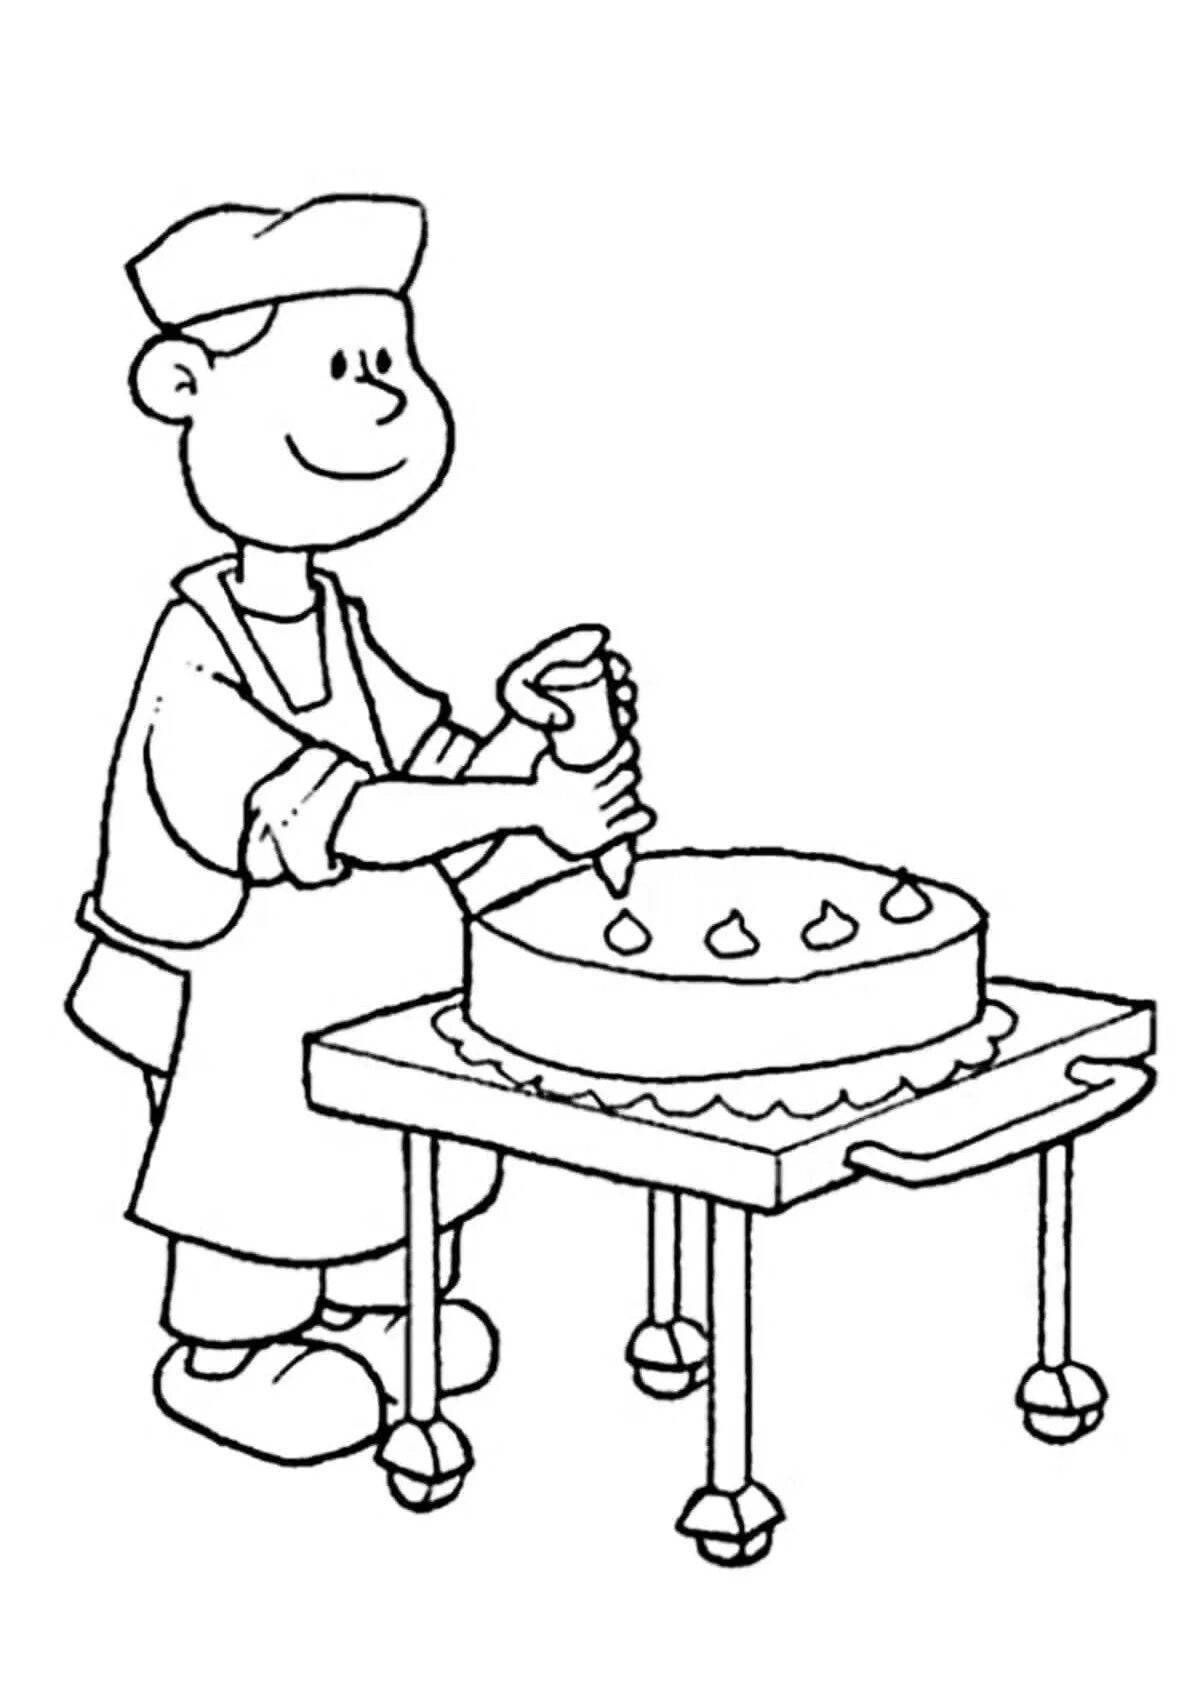 Fun job coloring pages for 7-9 year olds